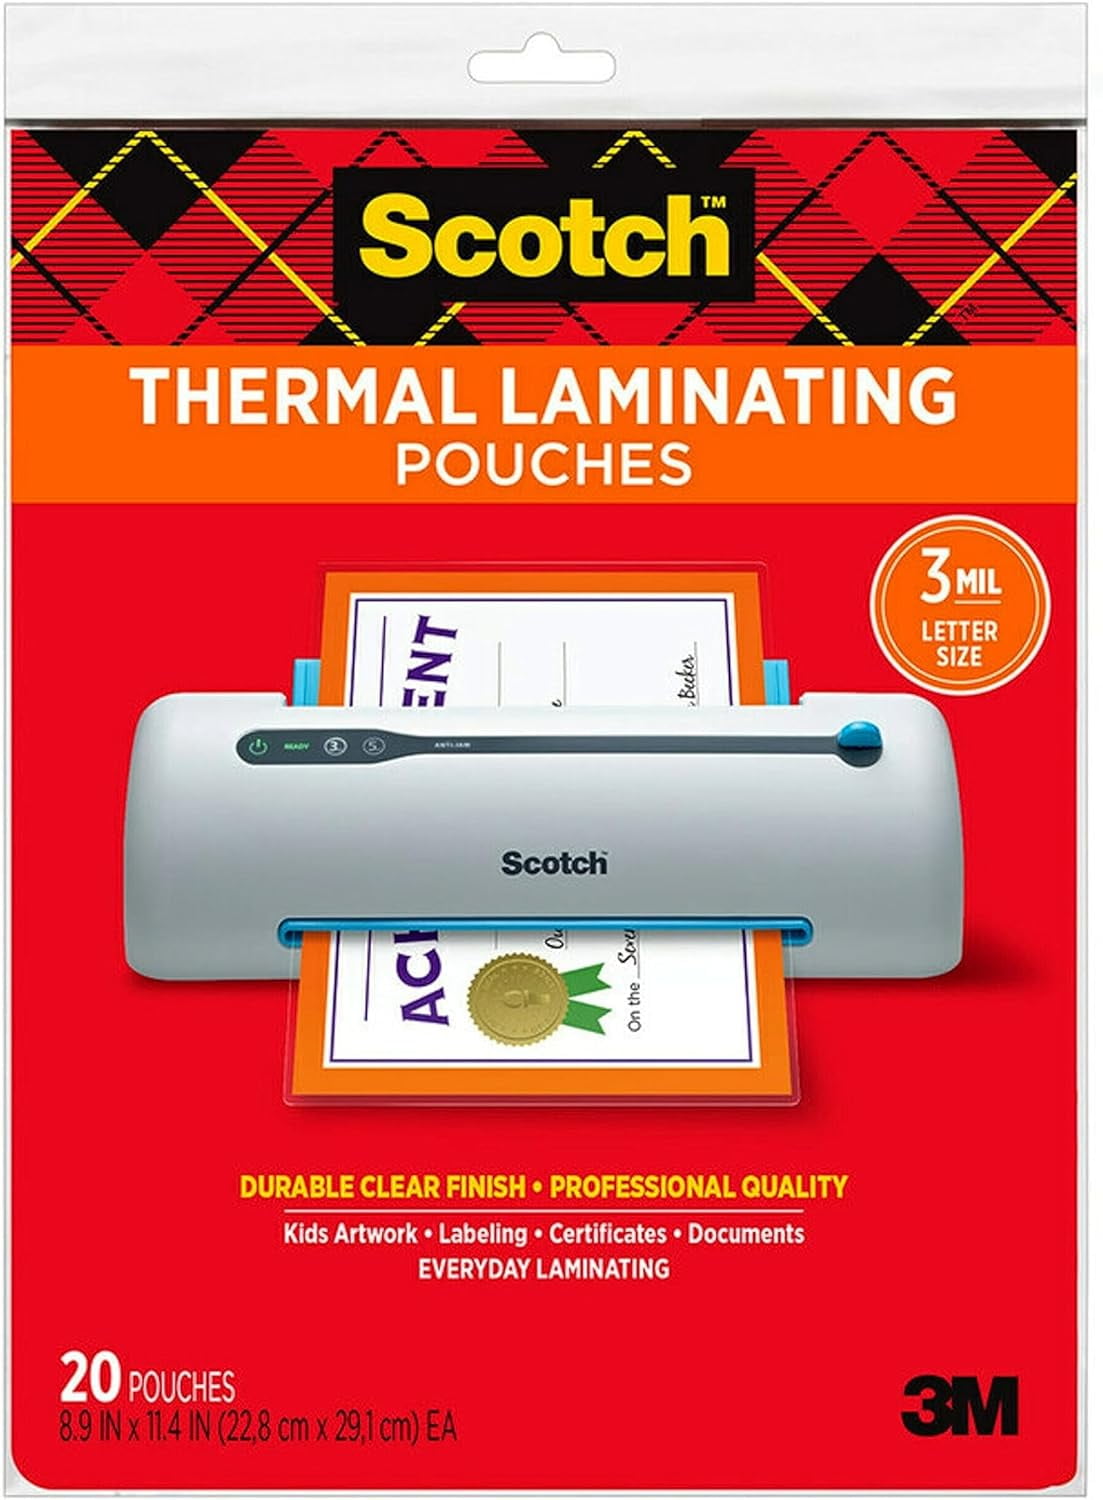 Scotch Thermal Laminating Pouches, 3 Mil Size